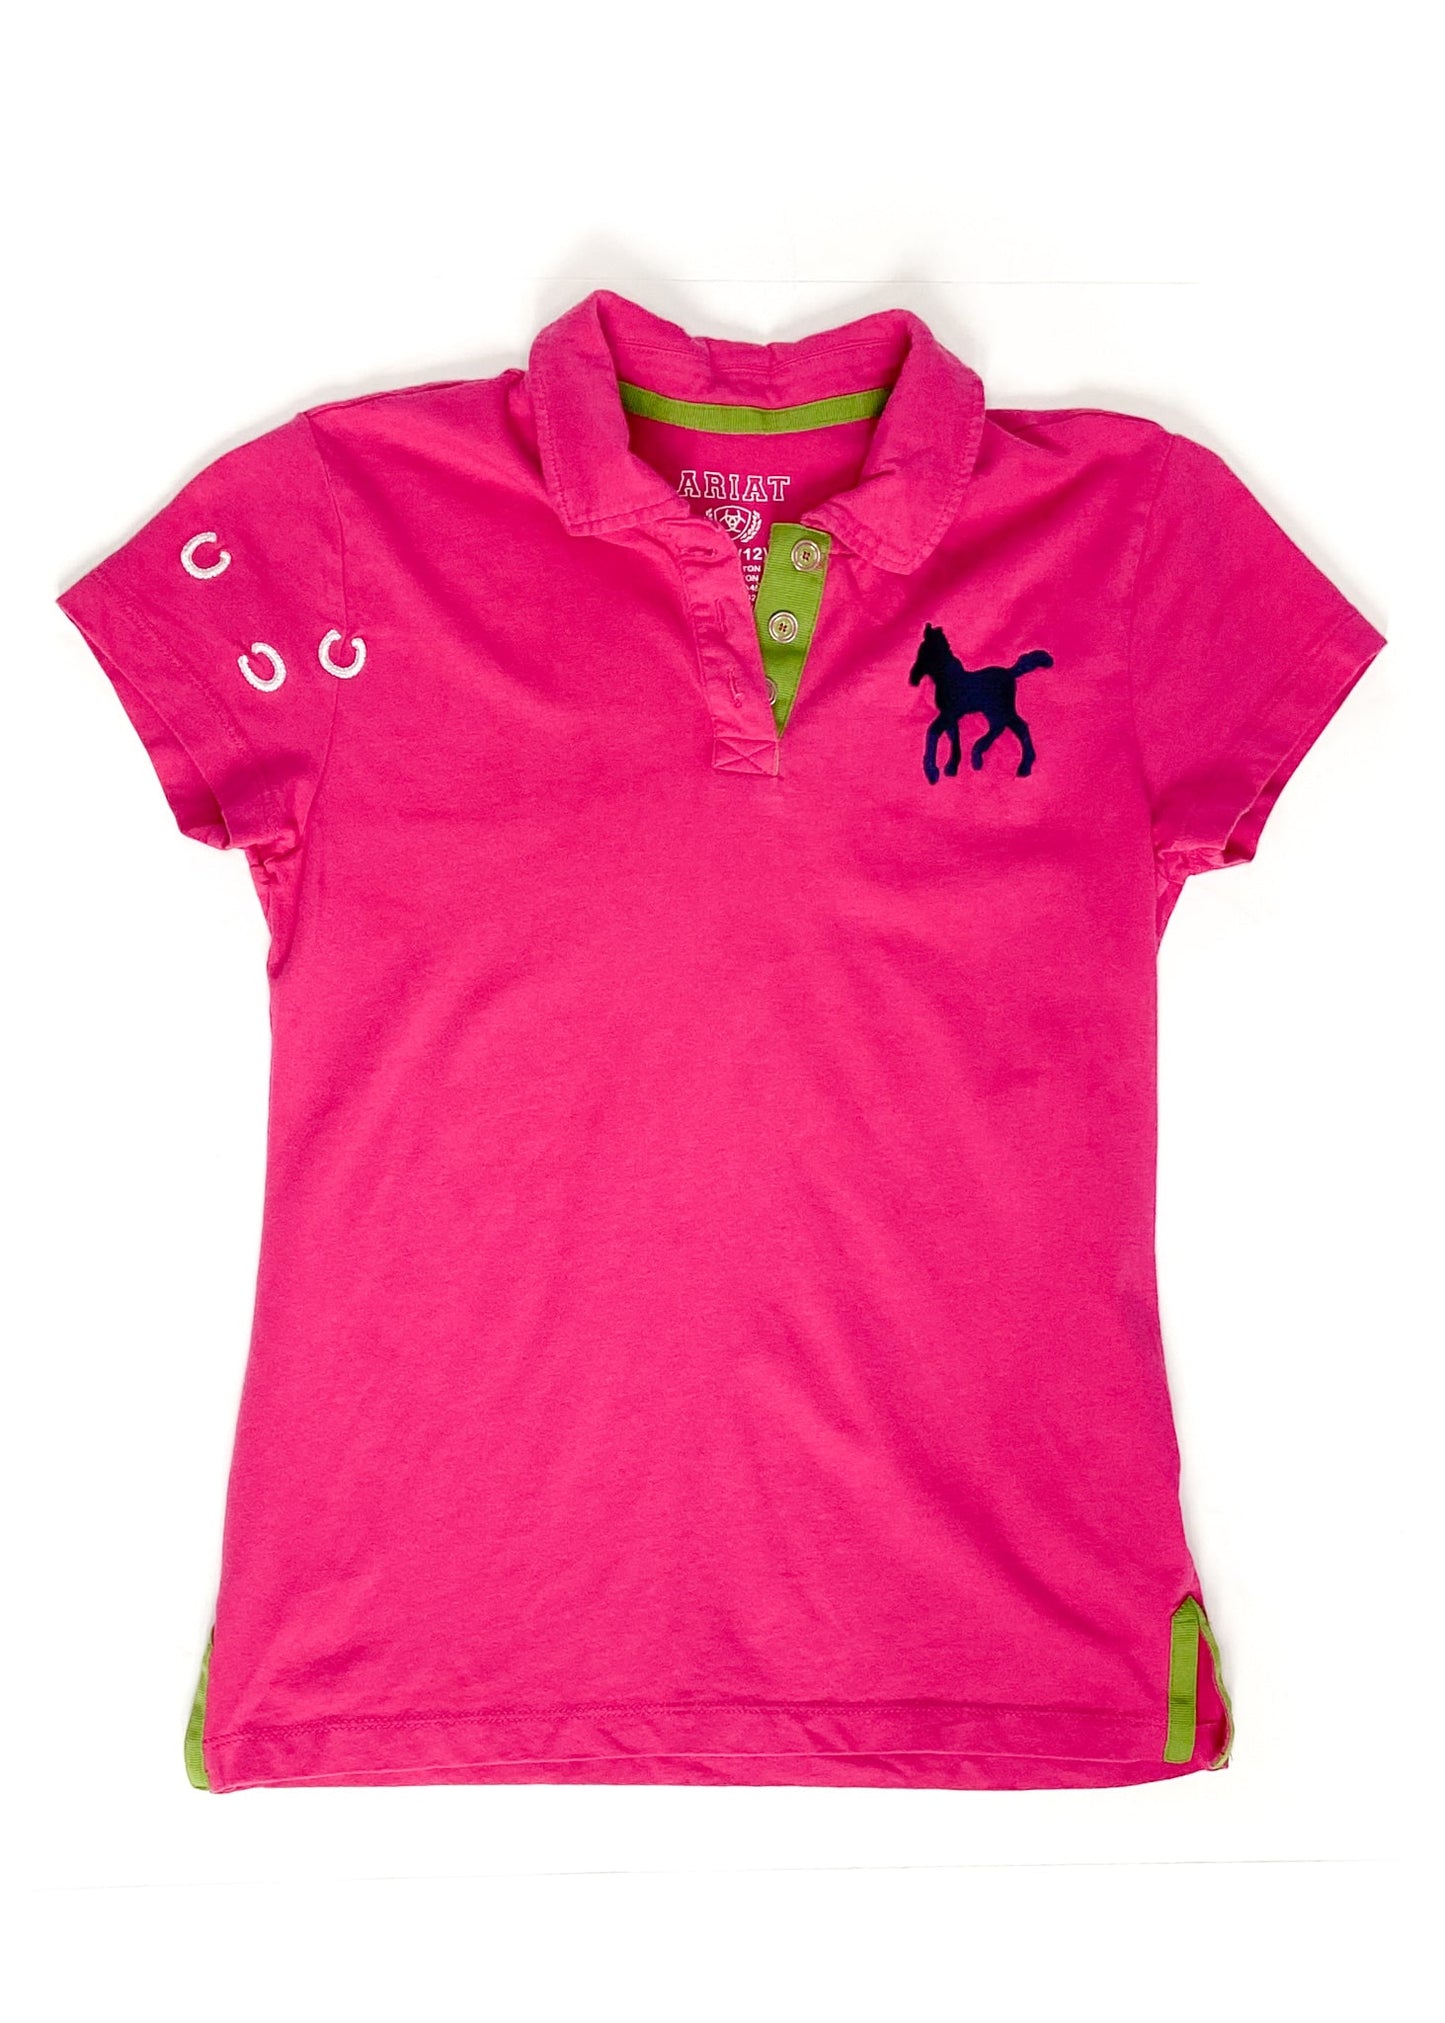 Ariat Short Sleeve Polo - Pink - Youth Large